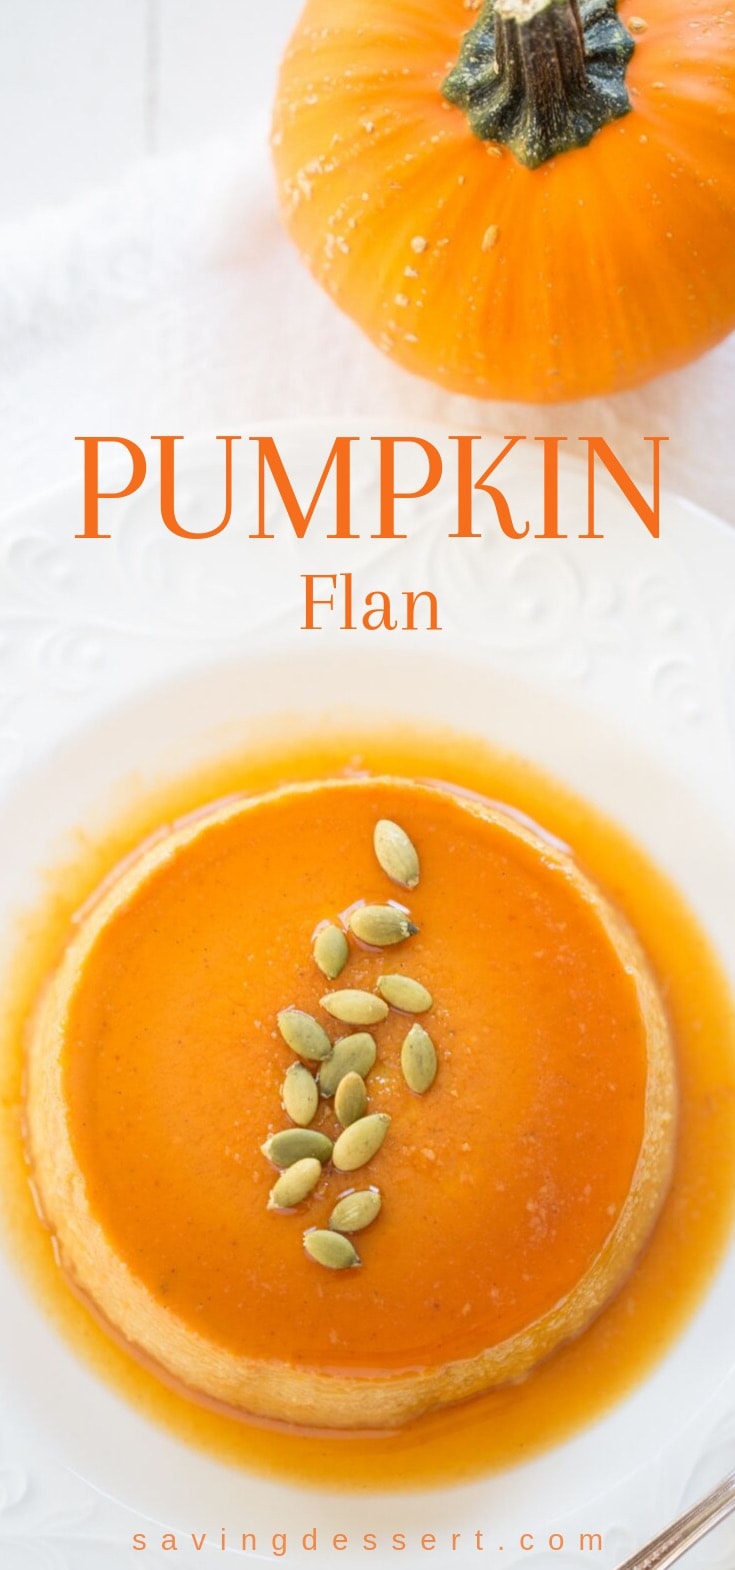 An overhead shot of a pumpkin flan with caramel garnished with pepitas